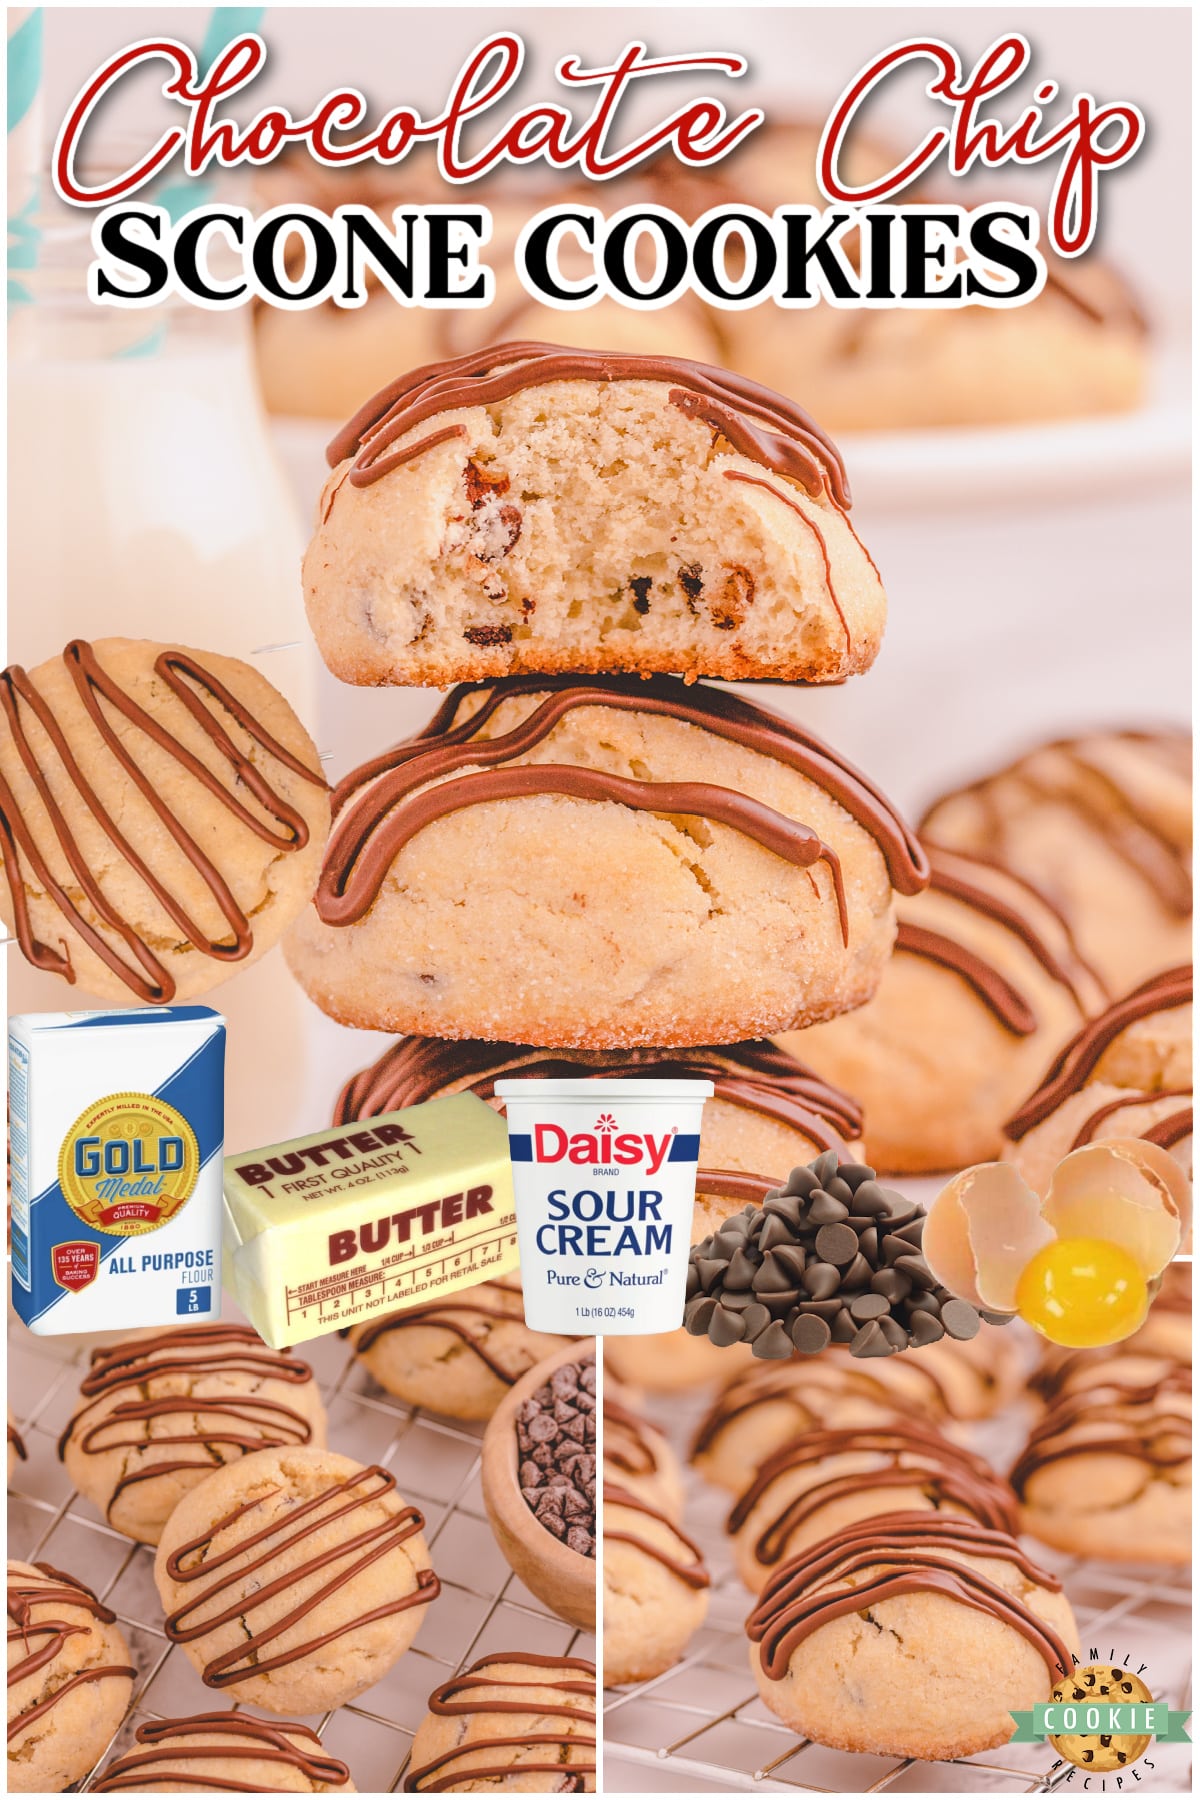 Chocolate Chip Scookies are cookies meets scones in a wonderful blend of soft dough and sweet chocolate drizzle! Tender, buttery scone-like cookies loaded with chocolate chips!